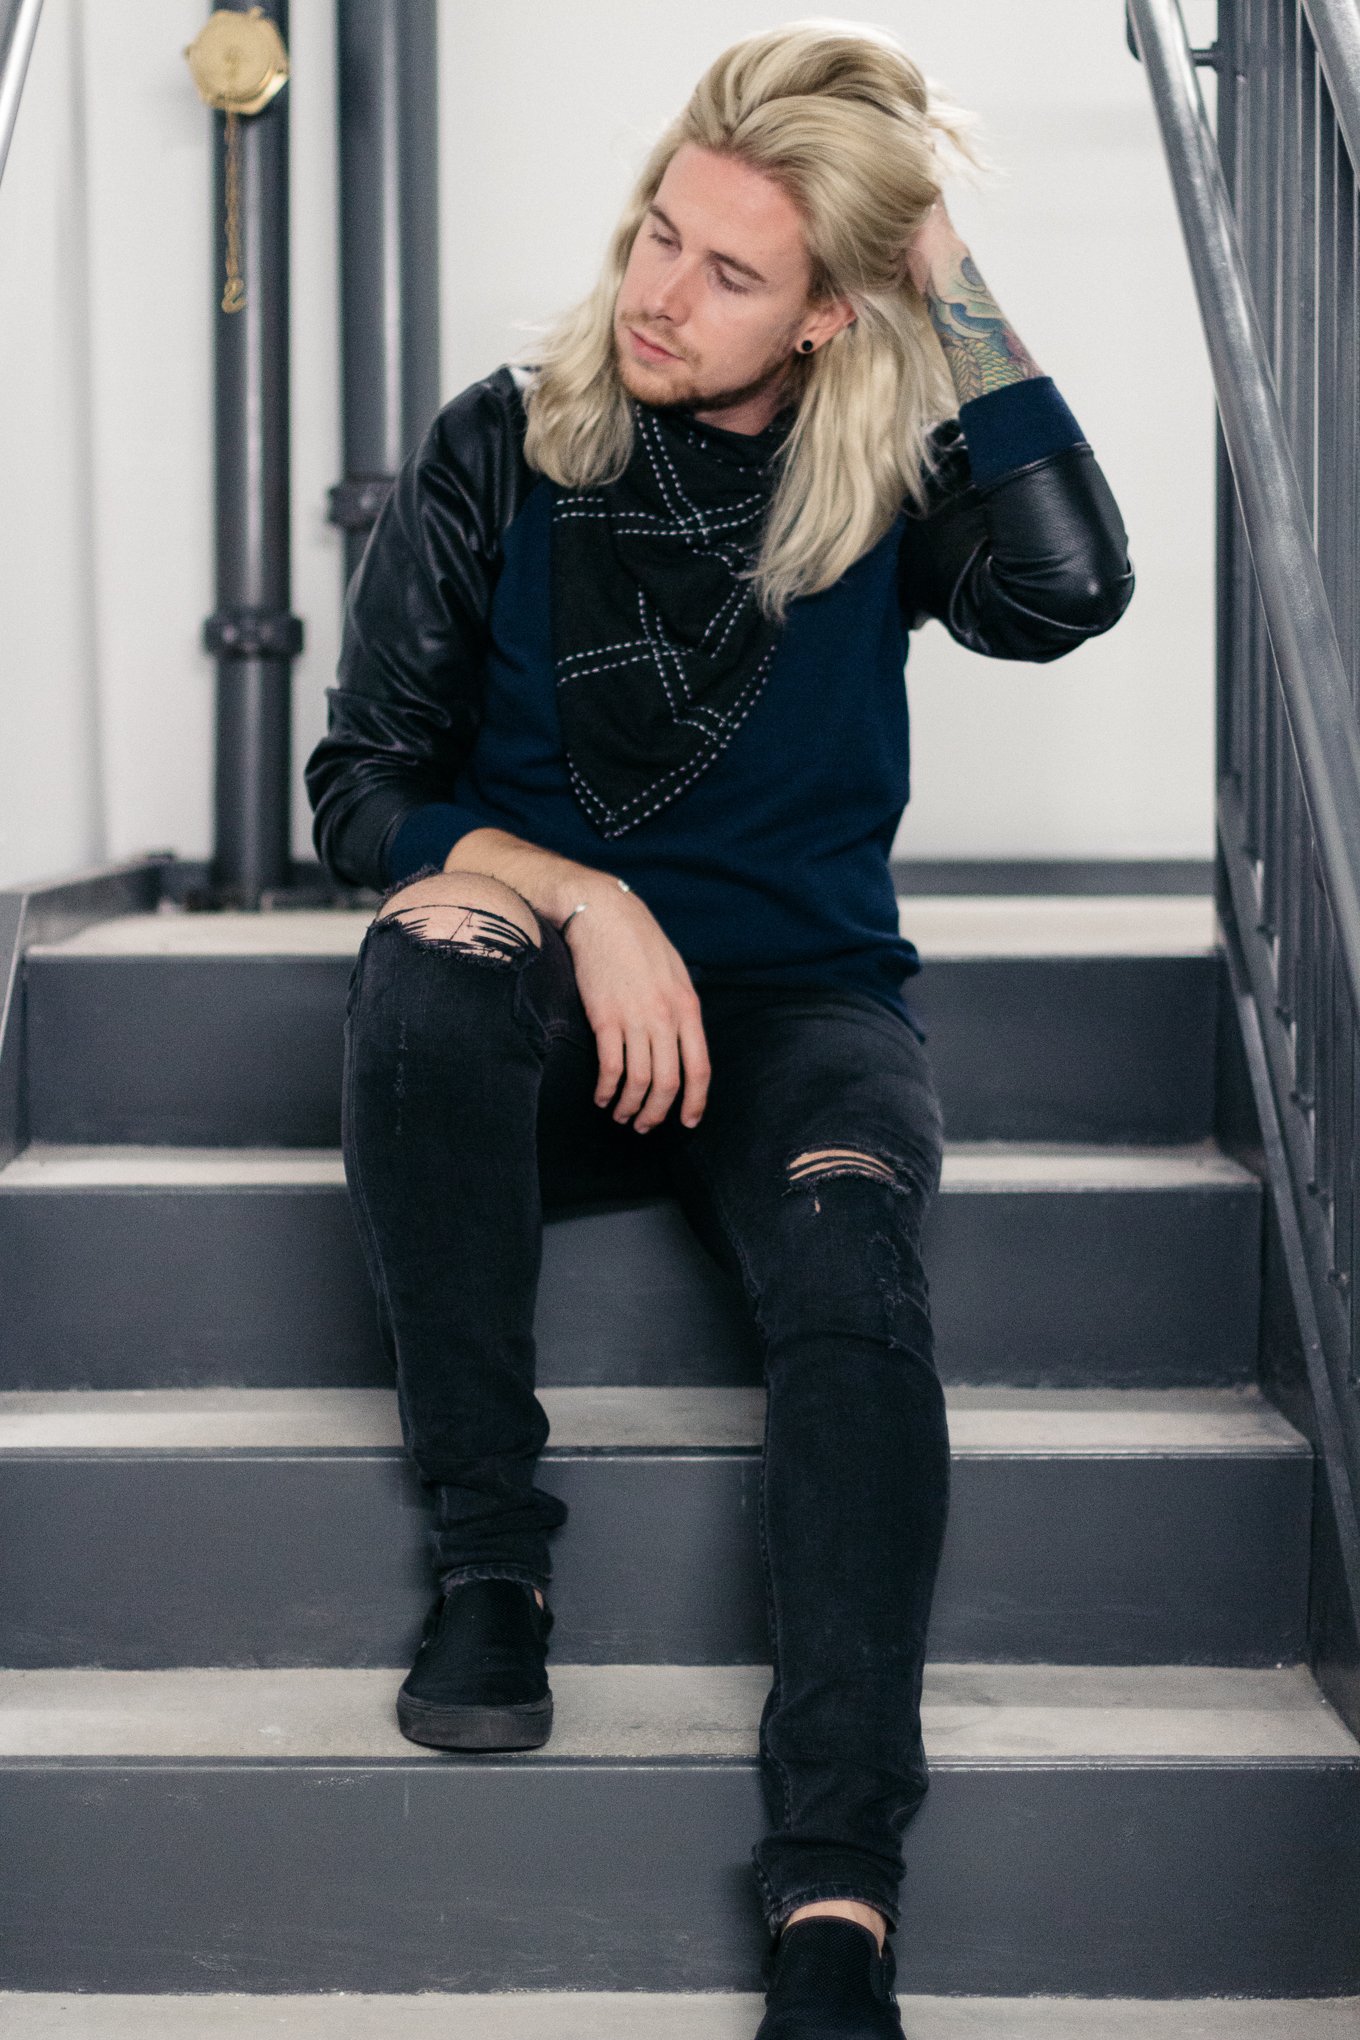 urban outfitters, anchal project, mens fall fashion, aloft hotel louisville, men with platinum blonde hair